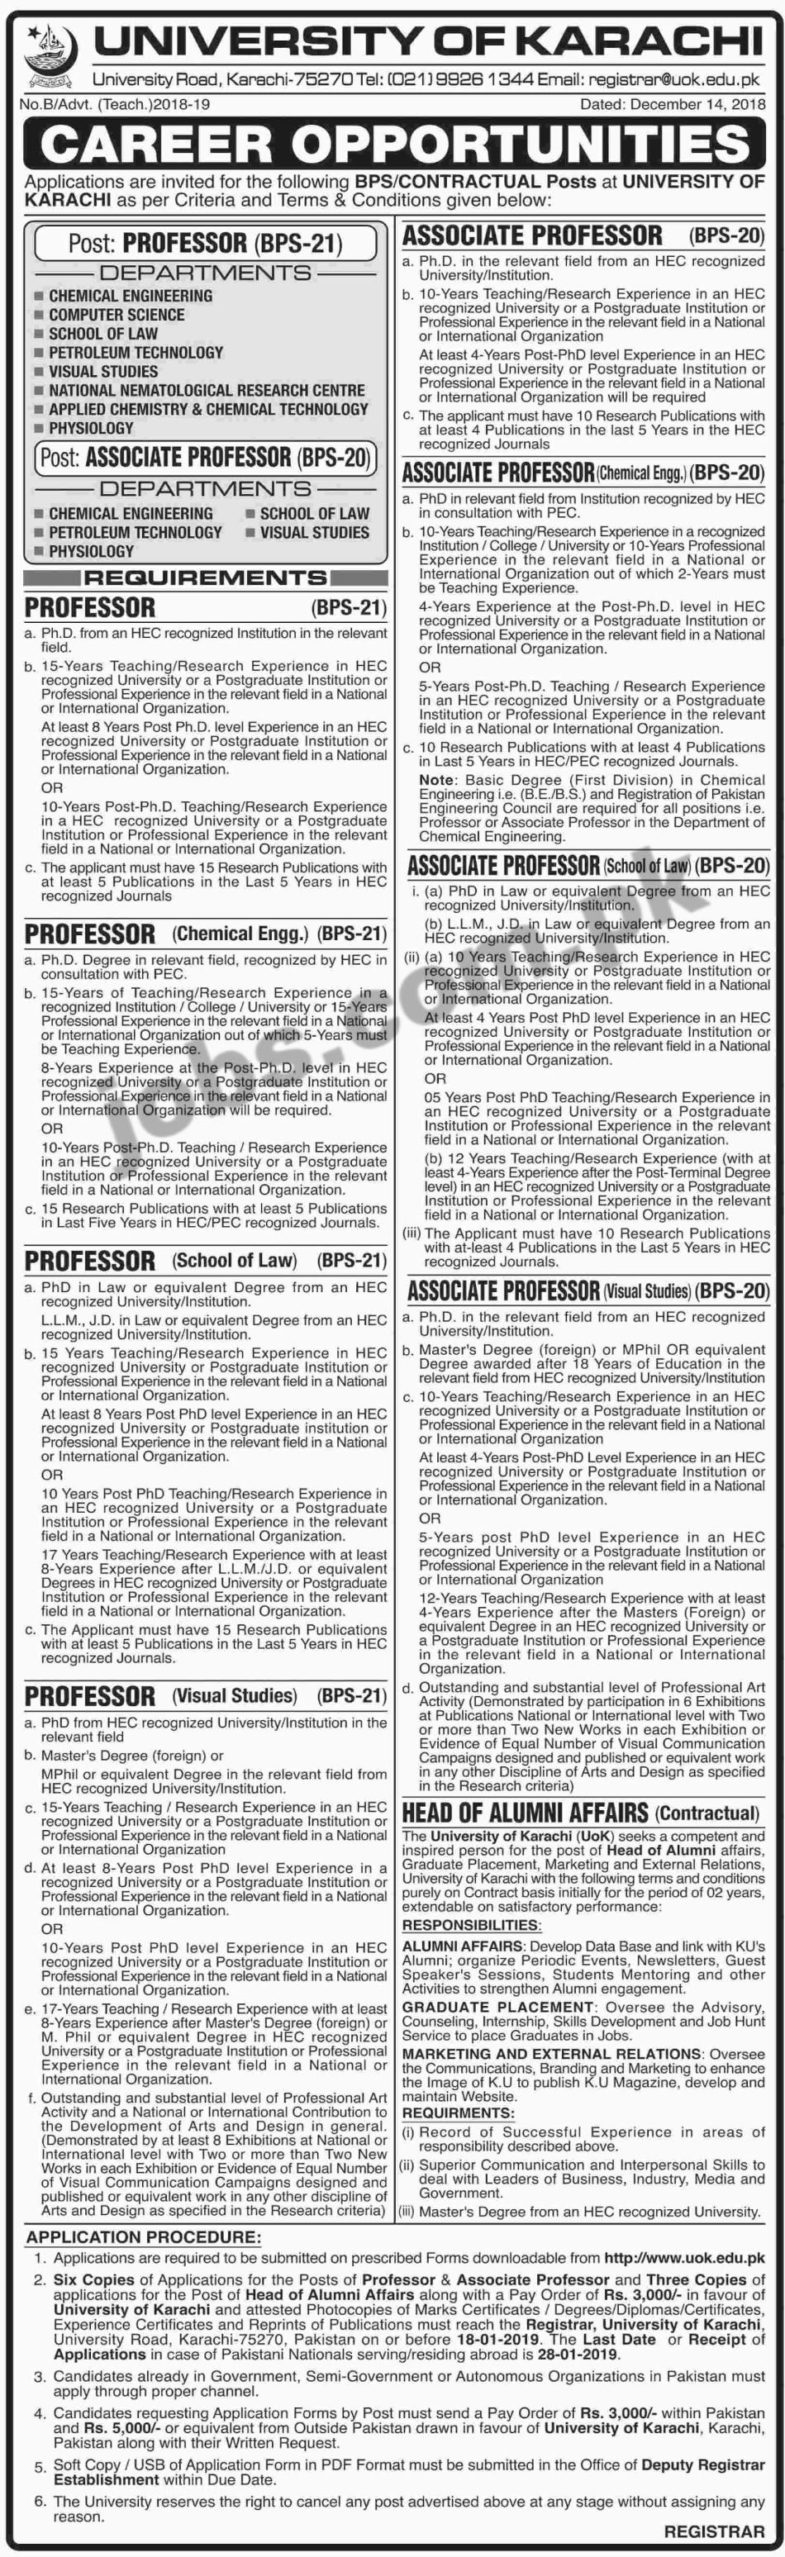 University of Karachi (UOK) Jobs 2019 – Apply Online: Name of the Organization: University of Karachi (UOK) Total No. of Vacancies: Multiple Qualifications & Age Limit: Please see job notification below for relevant experience, qualification & age limit information. Job Location: Karachi Last Date To Apply: 18th January 2019